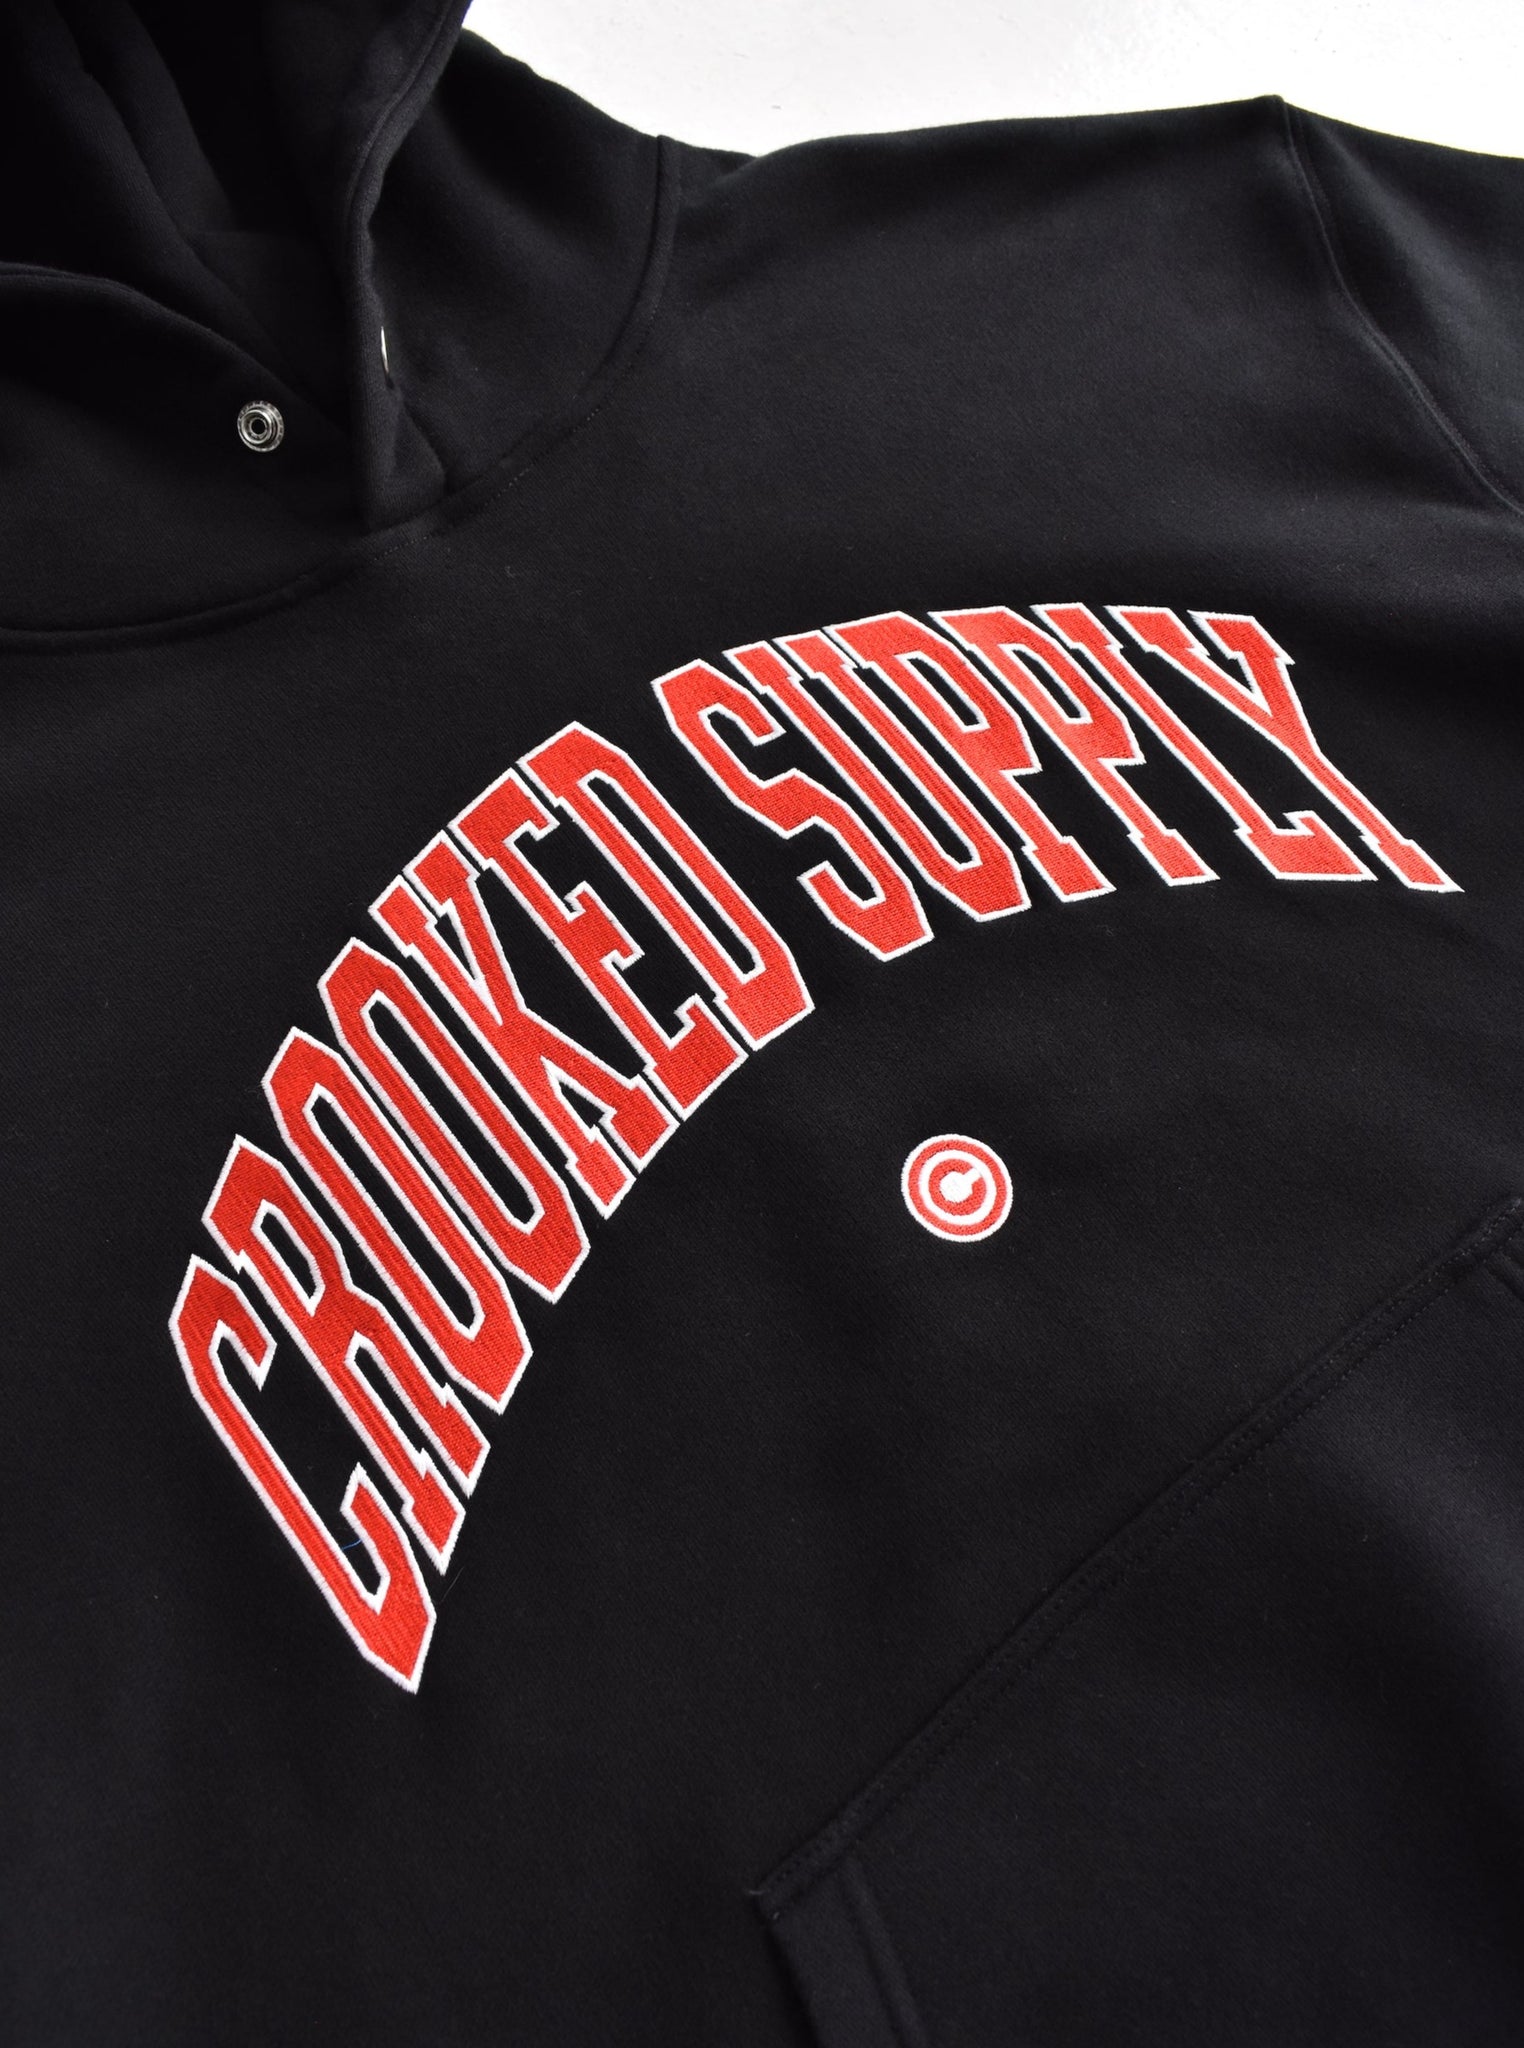 Jersey Hoodie - Black (Embroidered Logo)